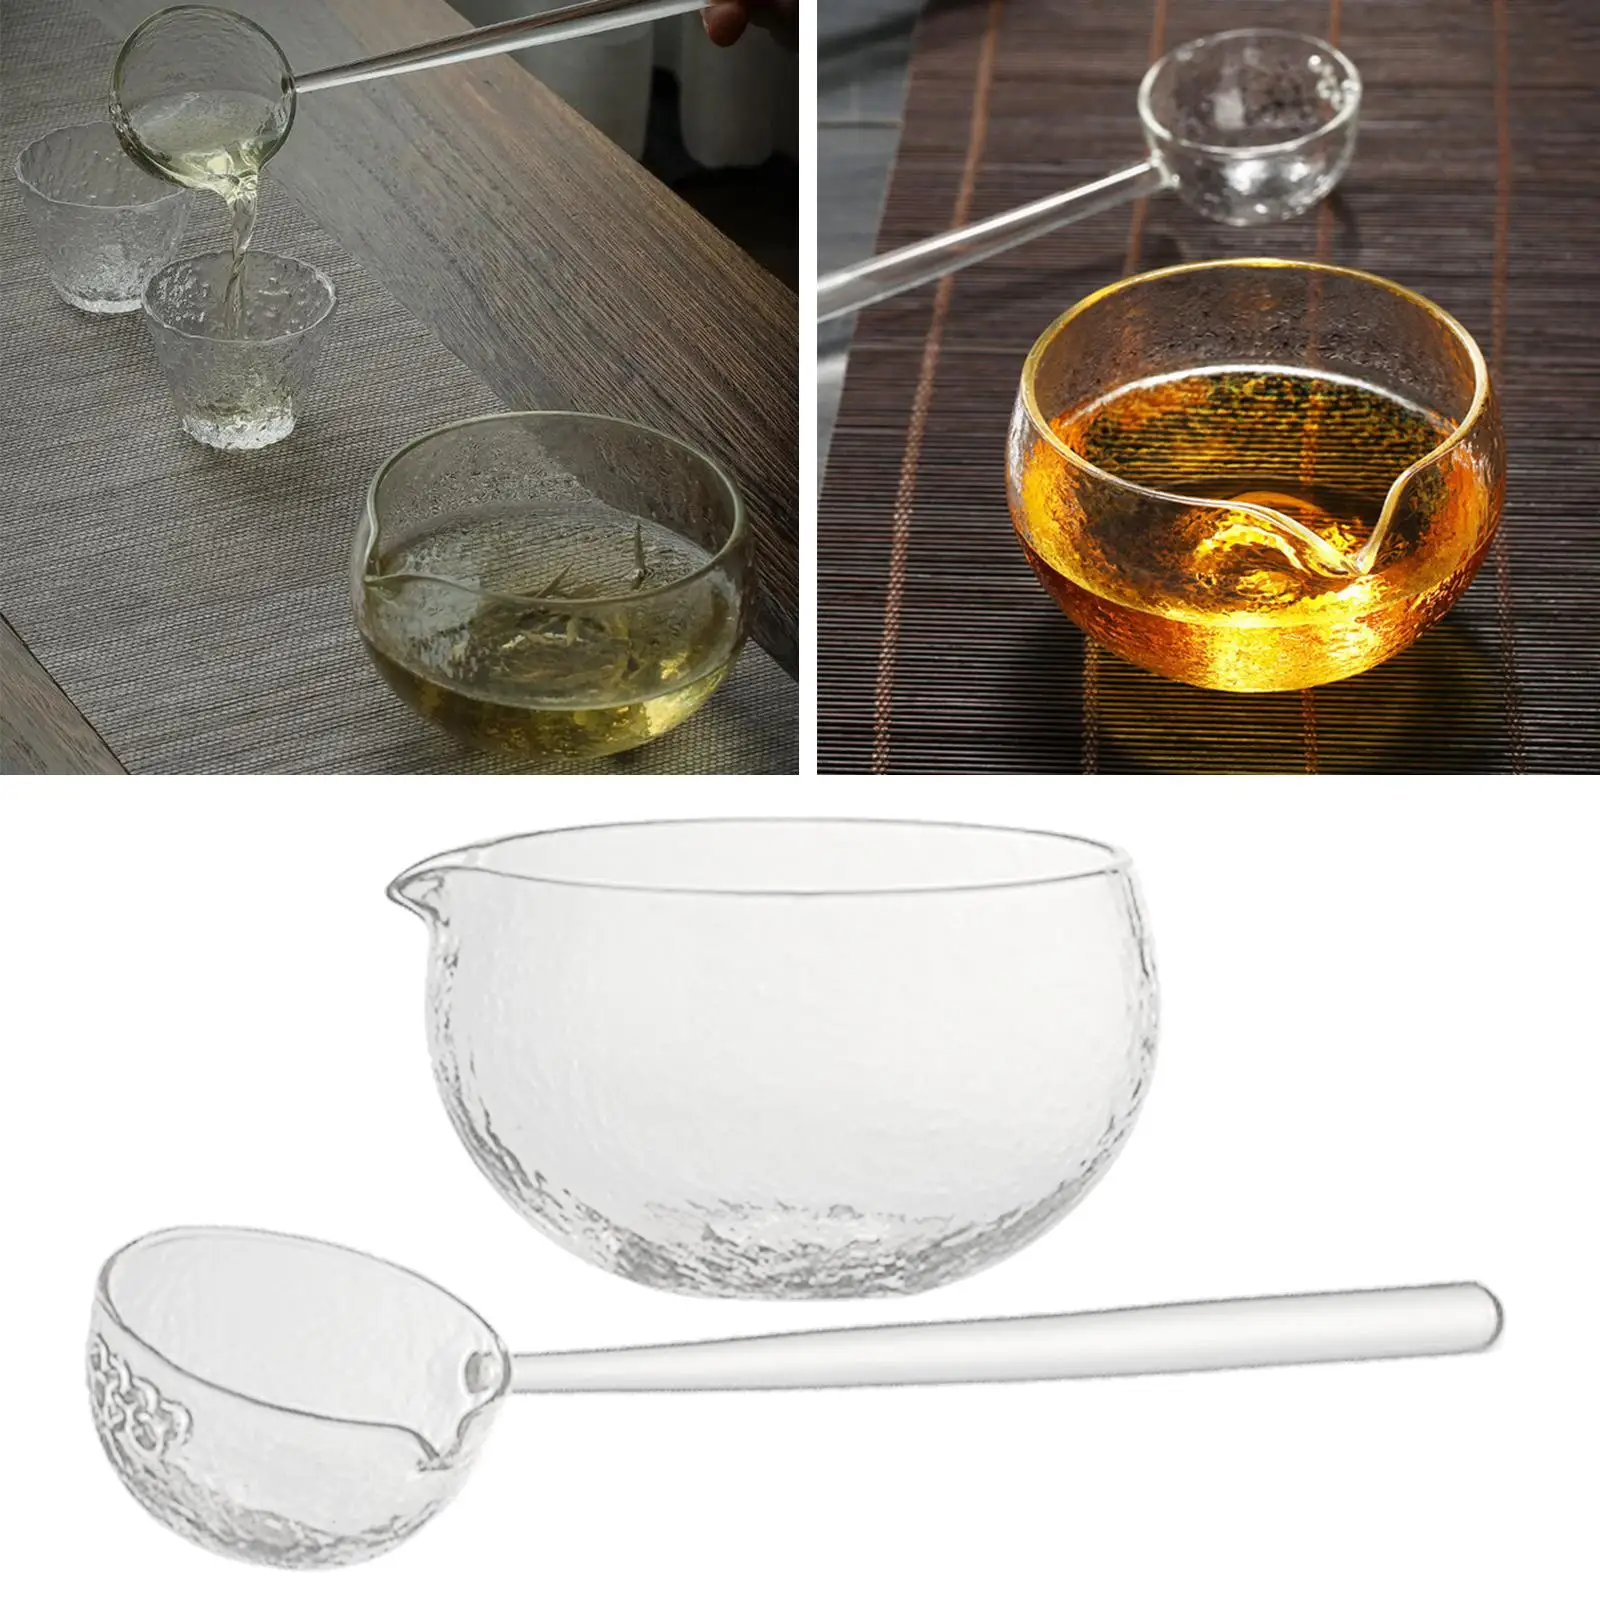 https://ae01.alicdn.com/kf/Sa3111ac6ec344587939d1d98c011217dO/High-Borosilicate-Textured-Glass-Matcha-Bowl-Spoon-with-Pouring-Spout-Teaware-Heat-Resistant-Matcha-Glass-Matcha.jpg